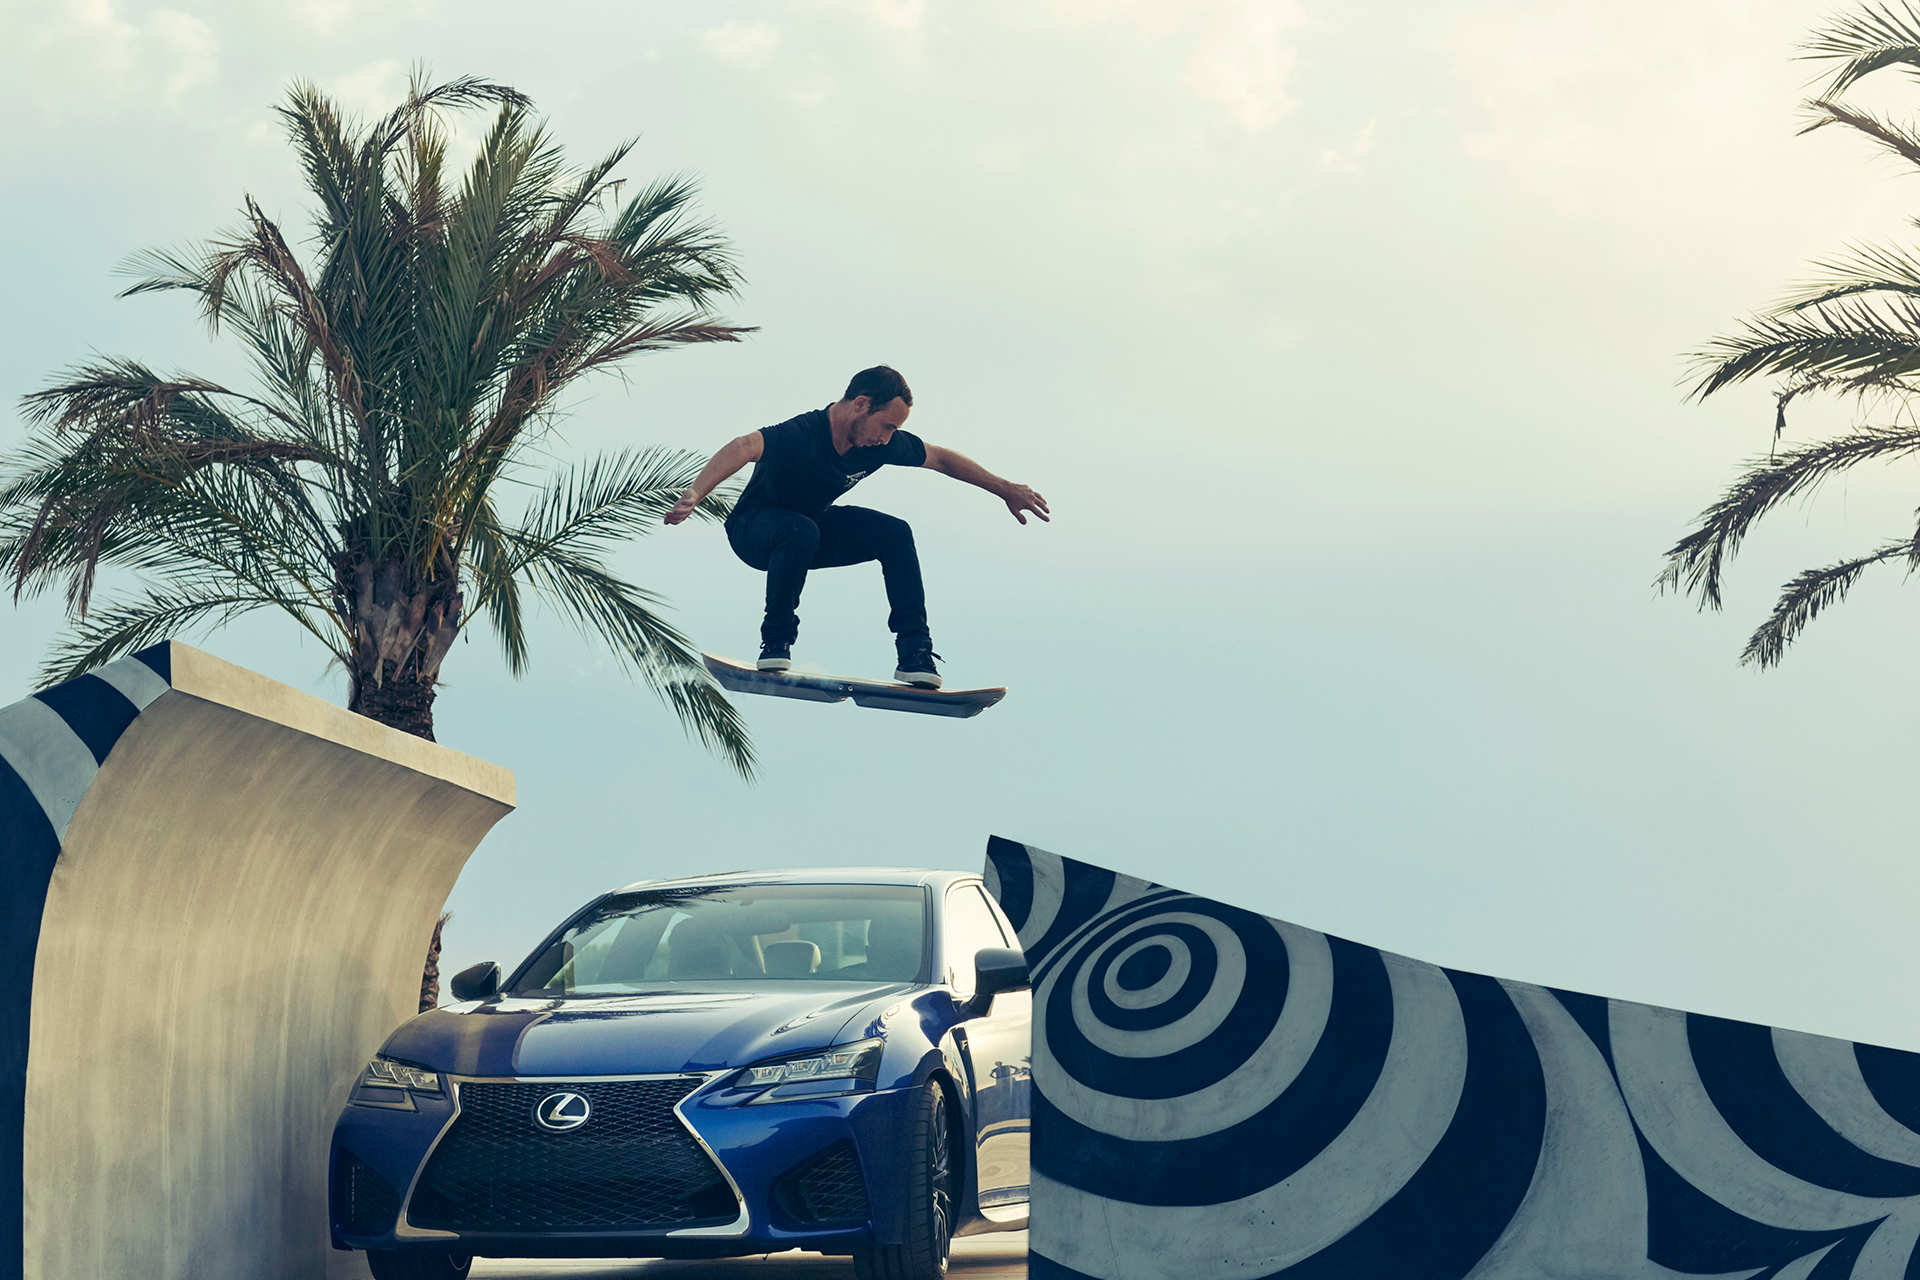 Lexus Hoverboard and GS F